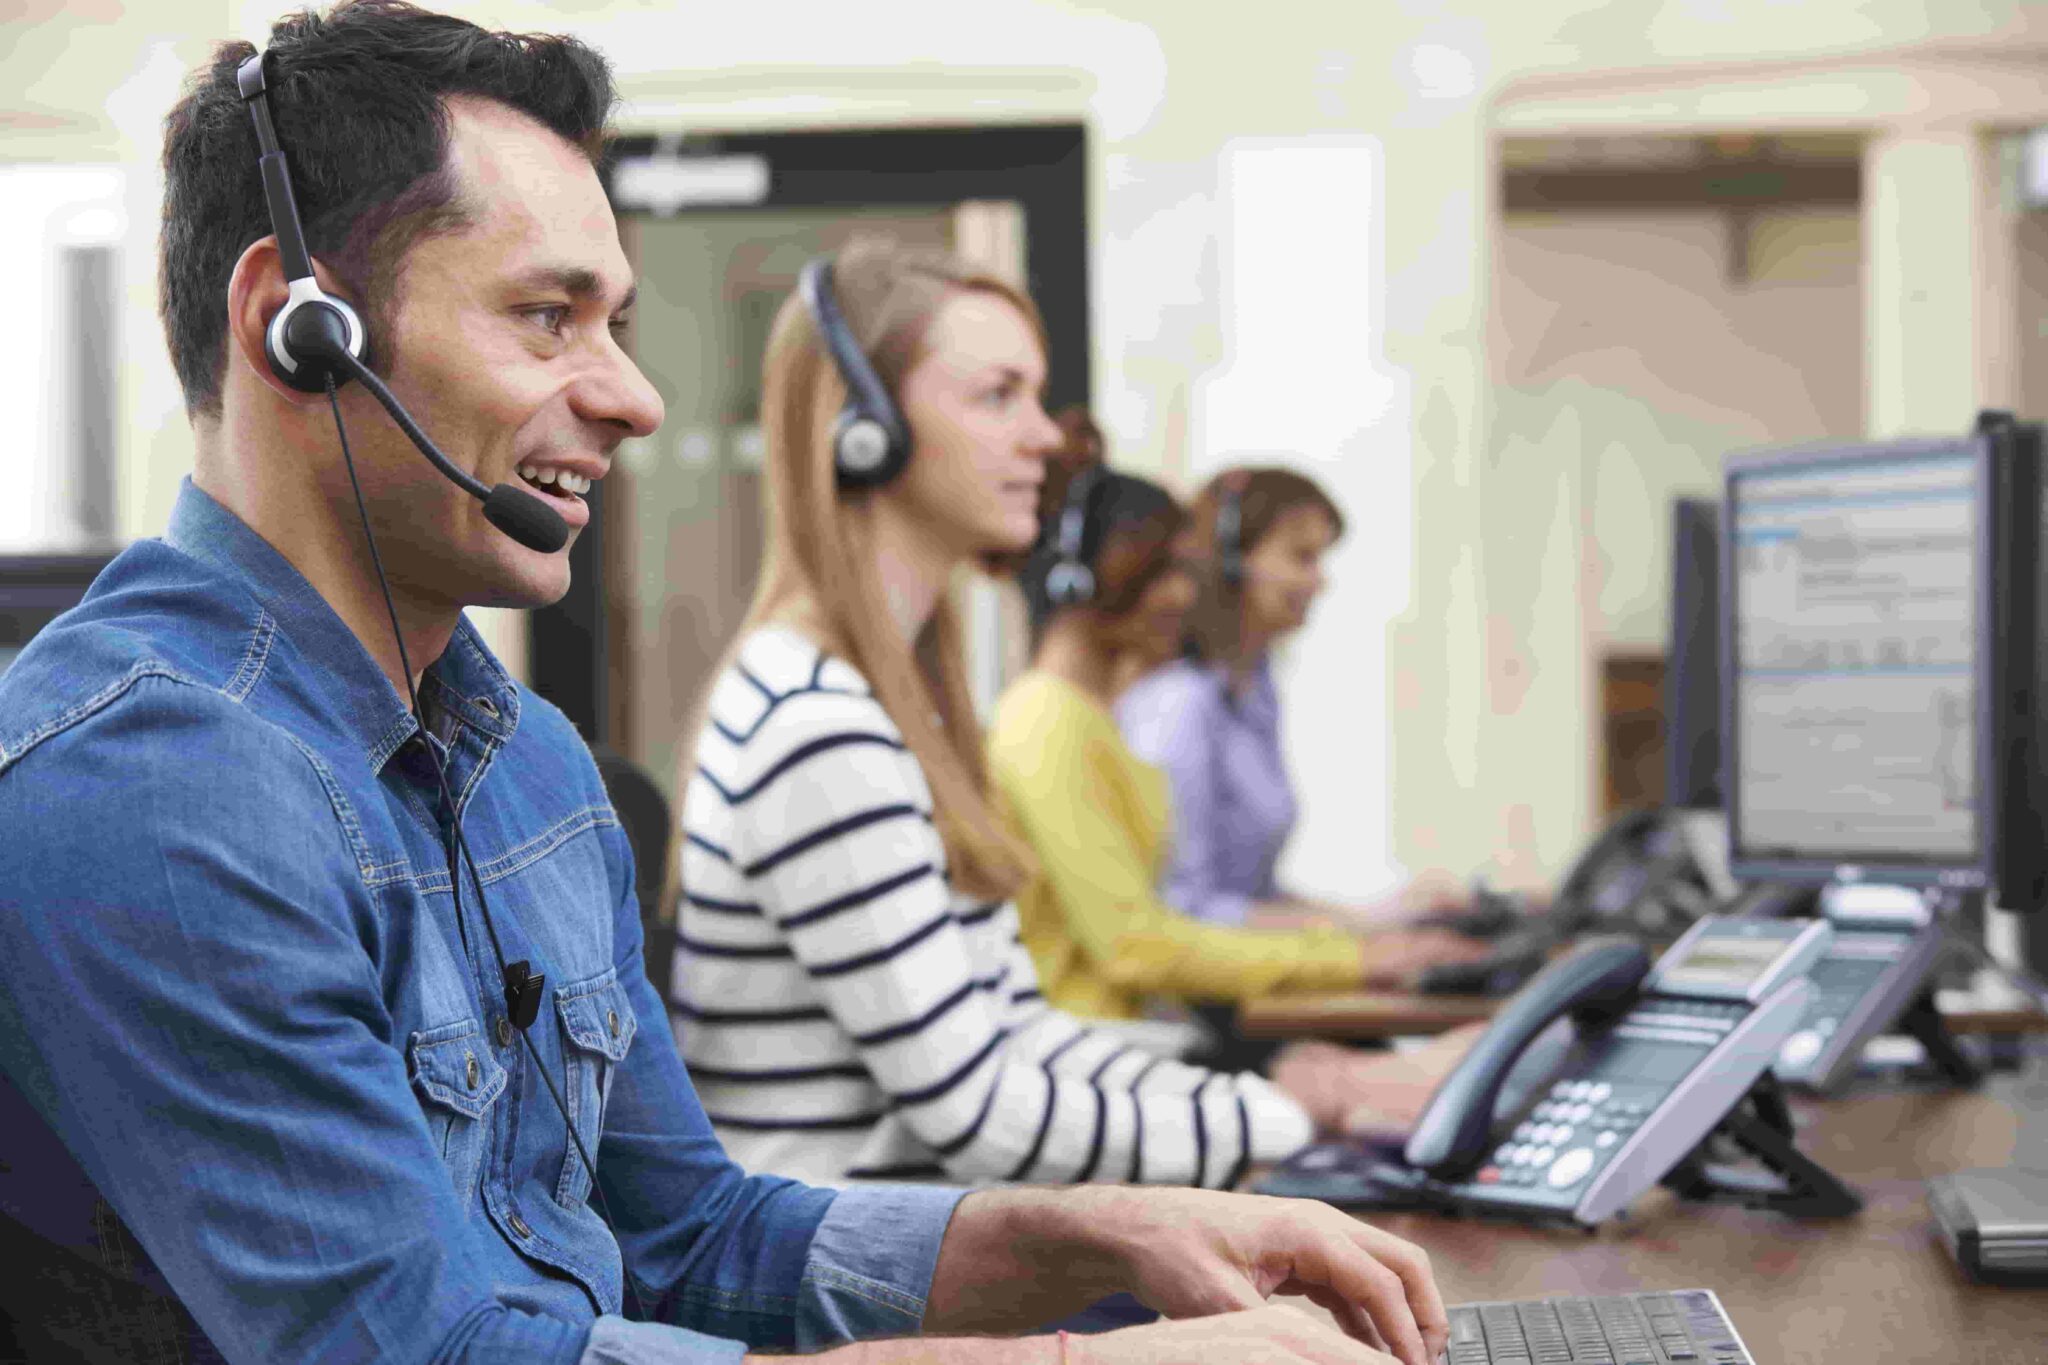 Man in blue shirt working in a call center